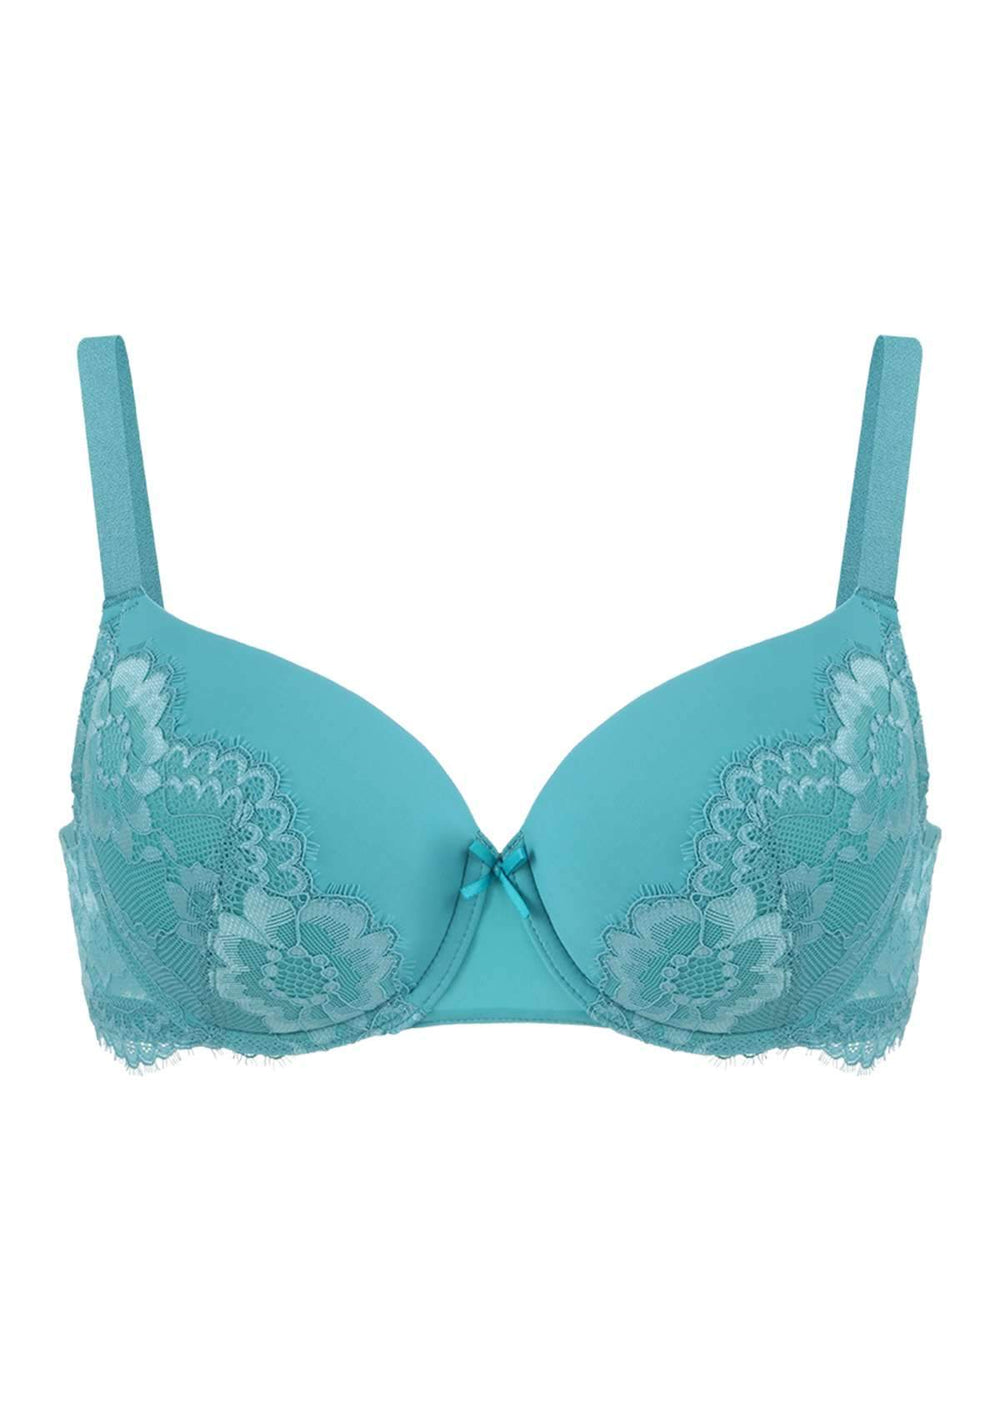 Blue/Teal brocade-like lace underwire push-up Bra- bow detail- Size 30A